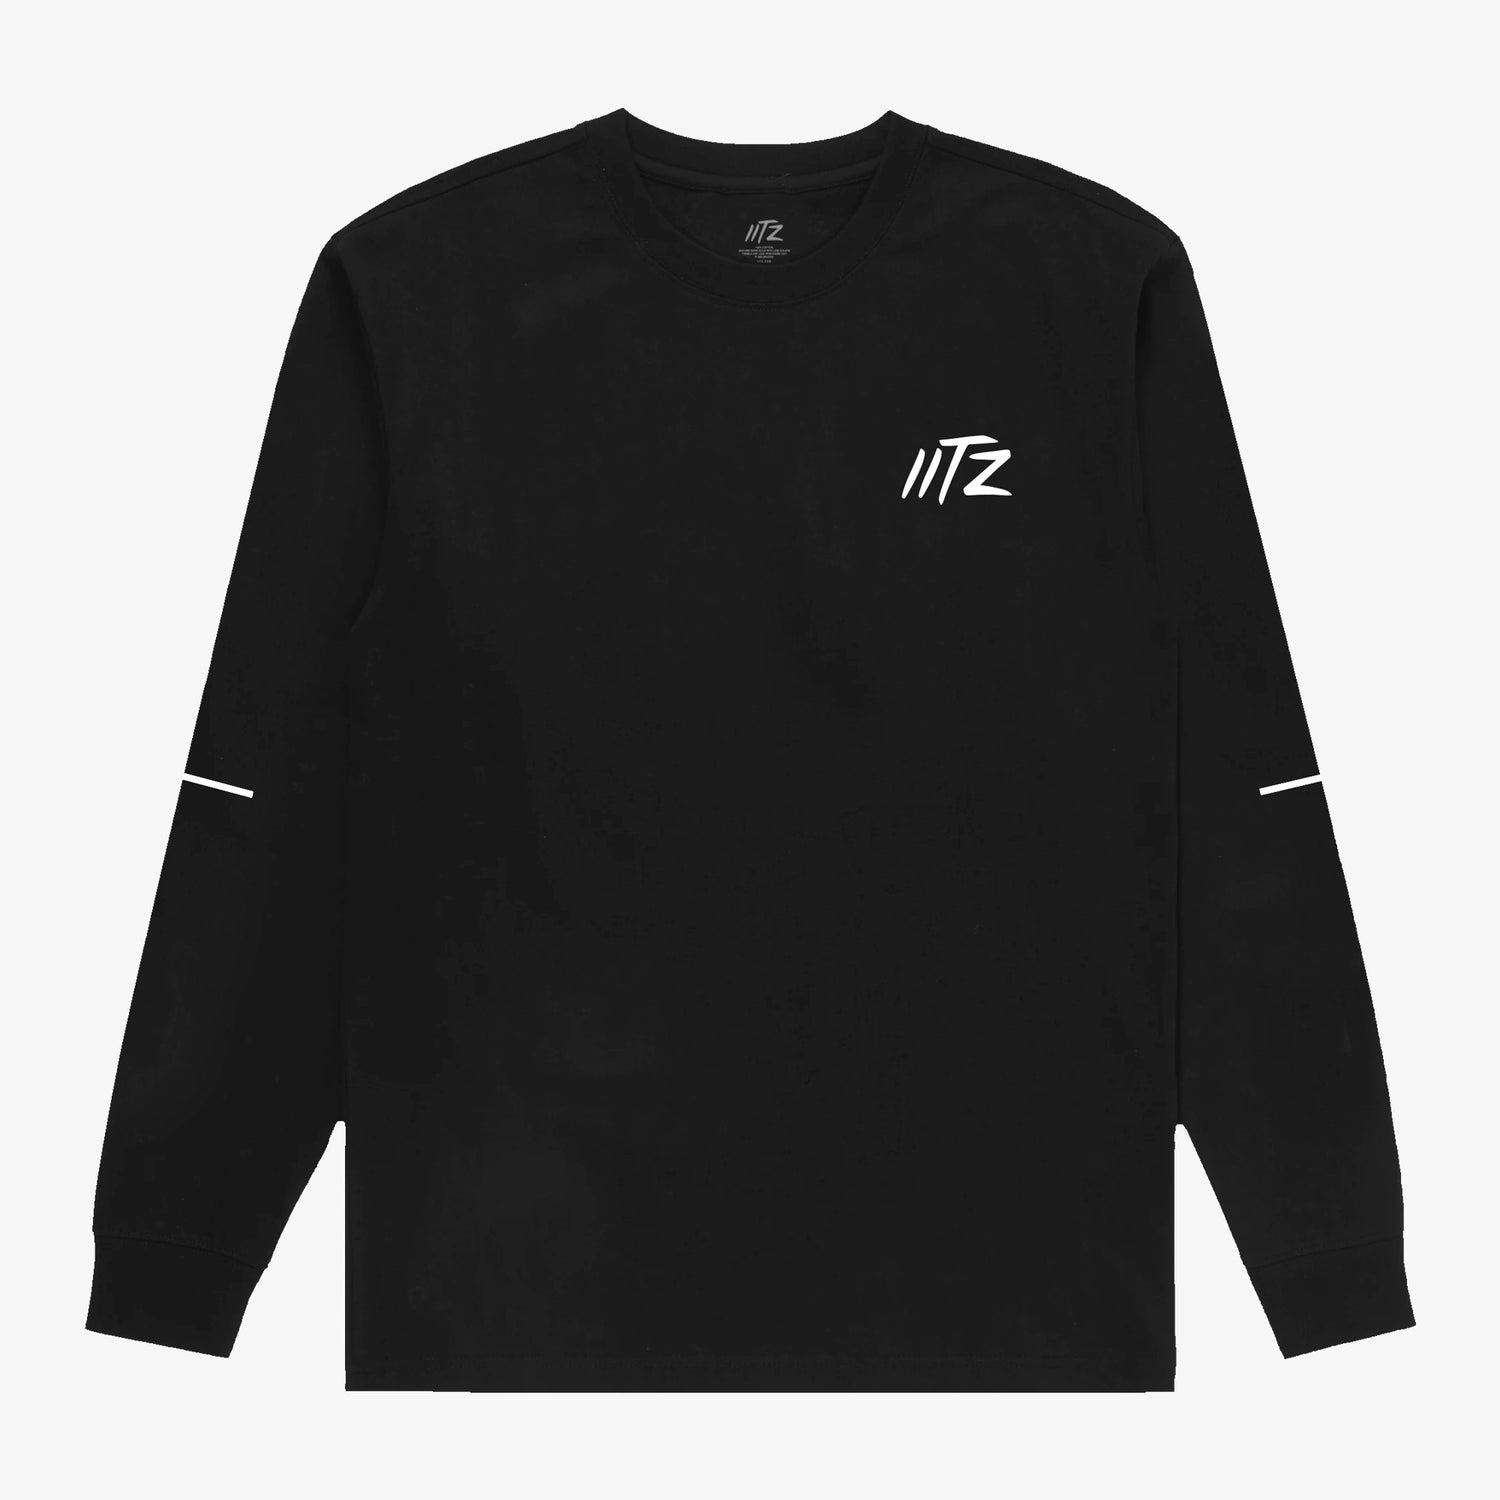 Where Dreams Are Made Black Long Sleeve